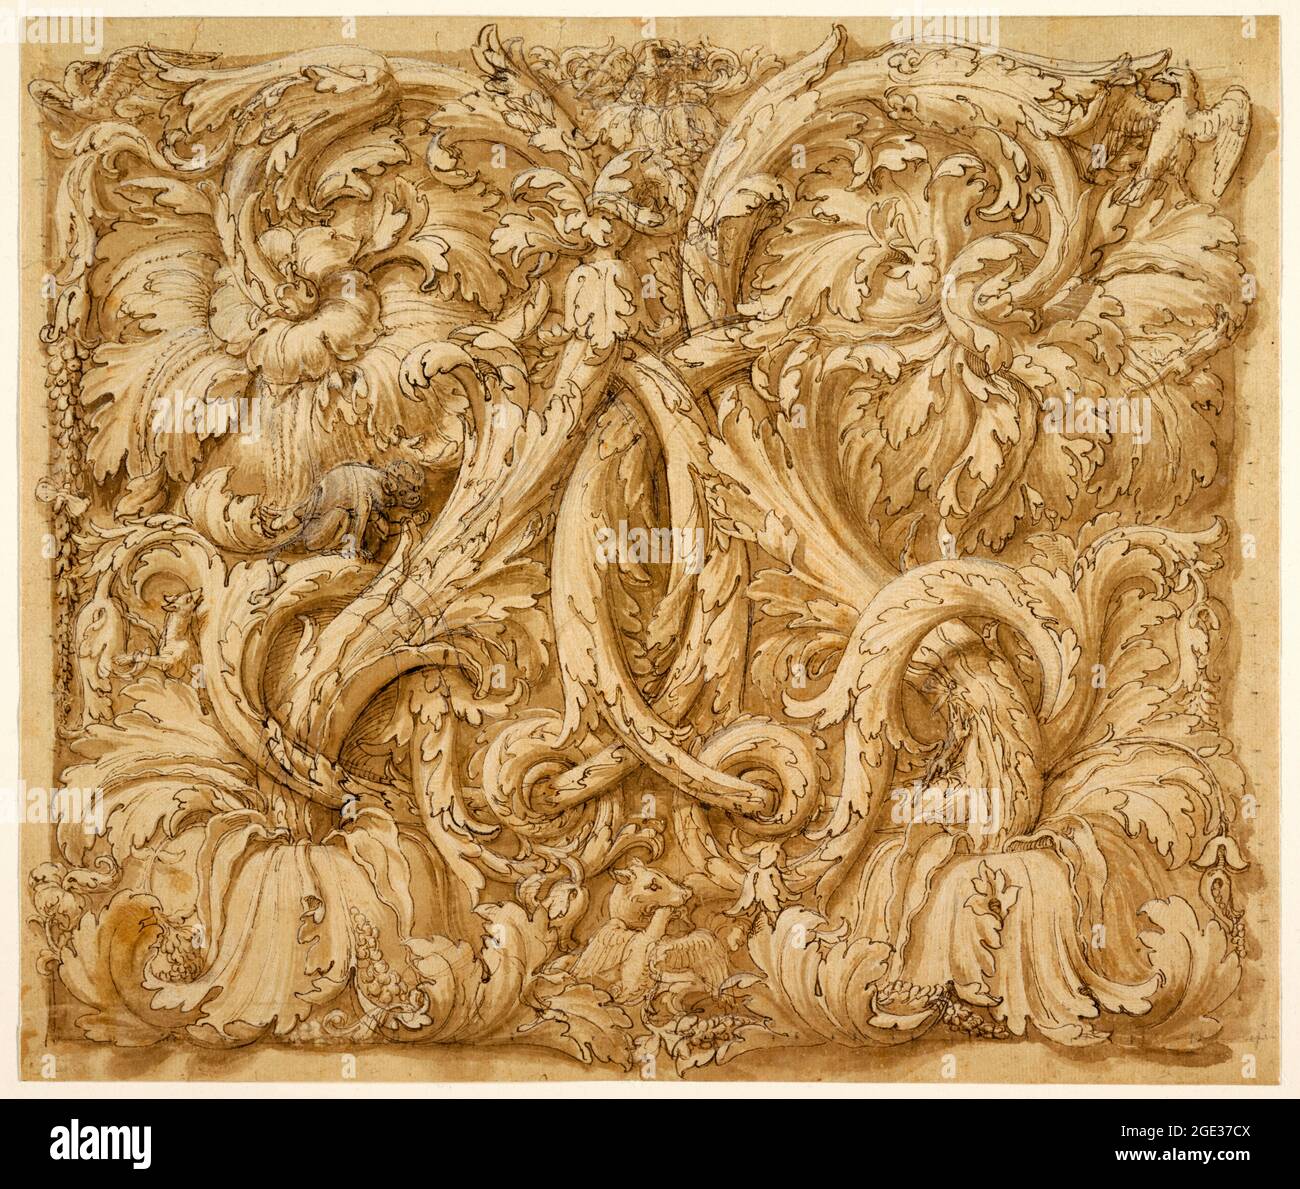 Giulio Romano (Giulio Pippi), Design for Acanthus Rinceaux with Animals and Birds, drawing, 1524-1545 Stock Photo